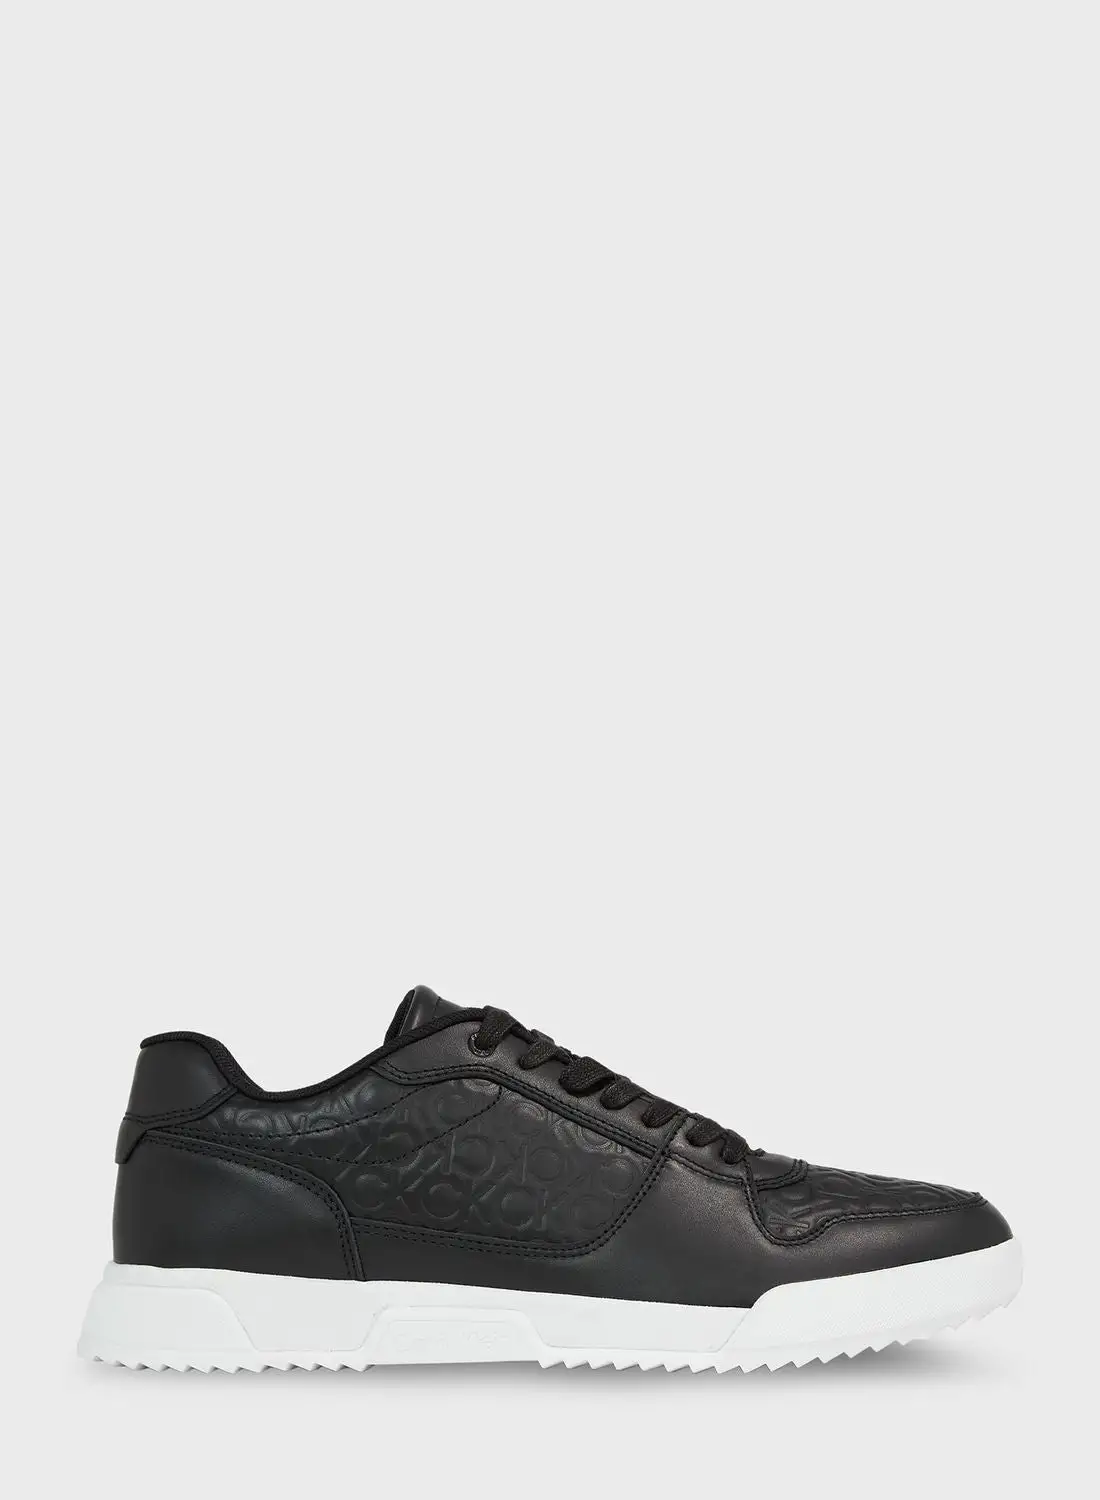 CALVIN KLEIN Low Top Lace Up Sneakers